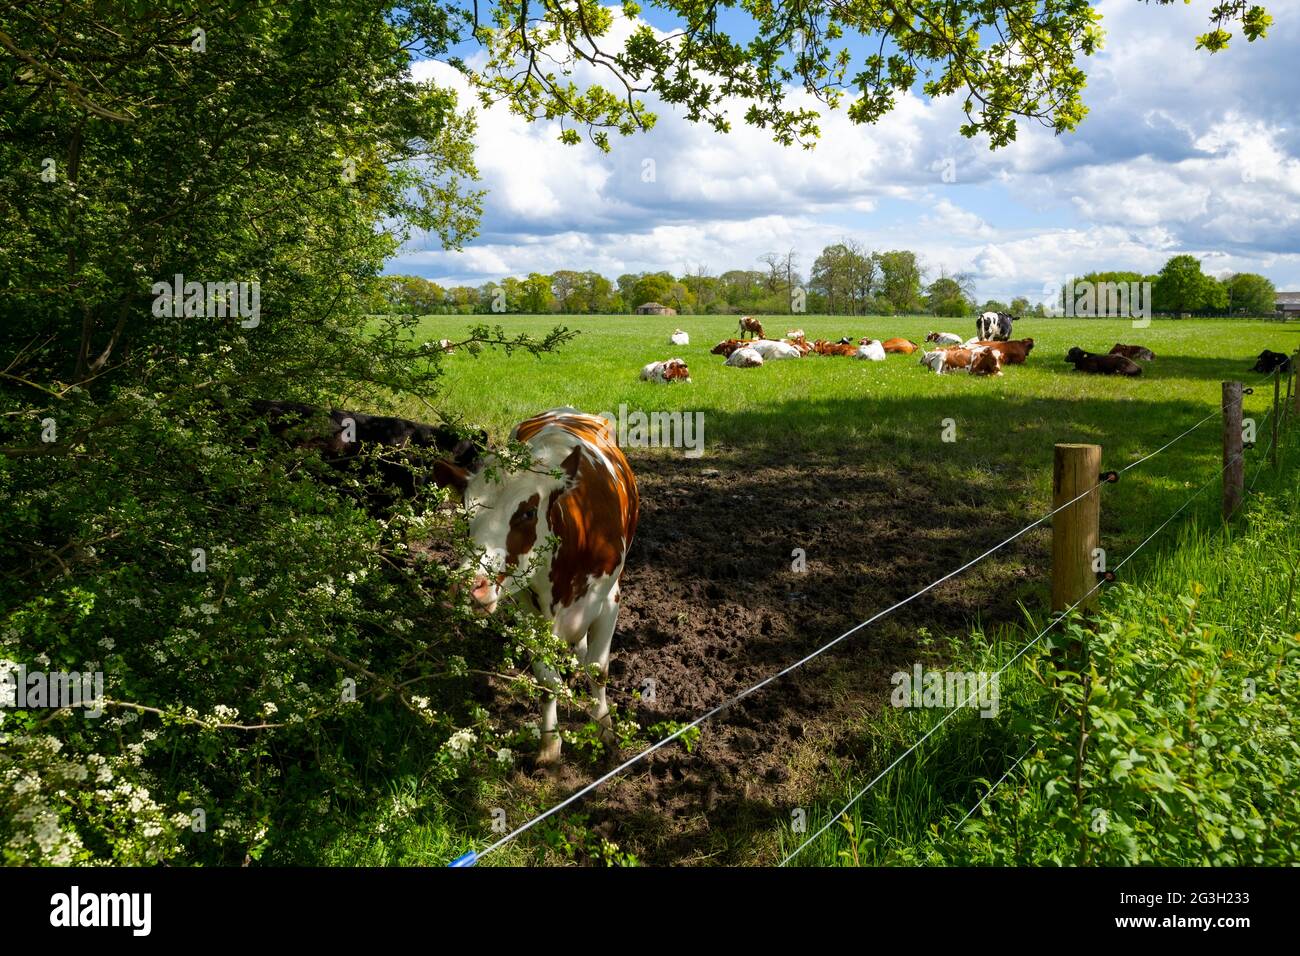 Herd of red and white friesian holstein cattle cows grazing on grassland meadow in a farmers field North Yorkshire England UK United Kingdom Britain Stock Photo